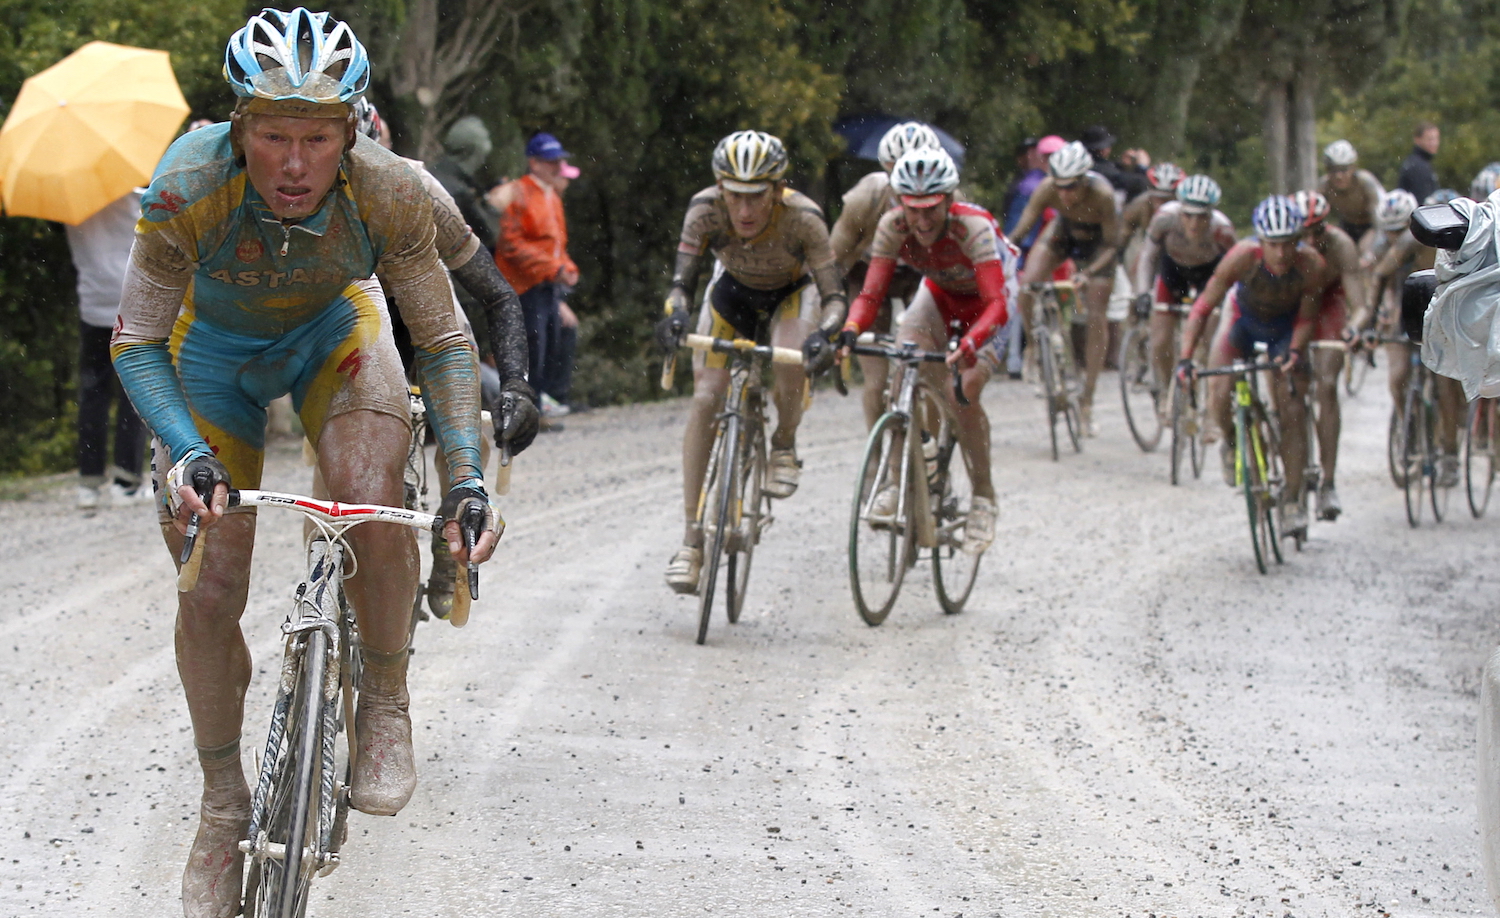 Kazakhstan's Alexandre Vinokourov (Astana) rides on the "strade bianche" (white roads) of Tuscany during the seventh stage of the 93rd Giro d'Italia going from Carrara to Montalcino on May 15, 2010. Australian Cadel Evans (BMC) won the stage as Kazakhstan's Alexandre Vinokourov (Astana) regained possession of the race leader's pink jersey. AFP PHOTO / POOL / ROBERTO BETTINI (Photo credit should read ROBERTO BETTINI/AFP via Getty Images)